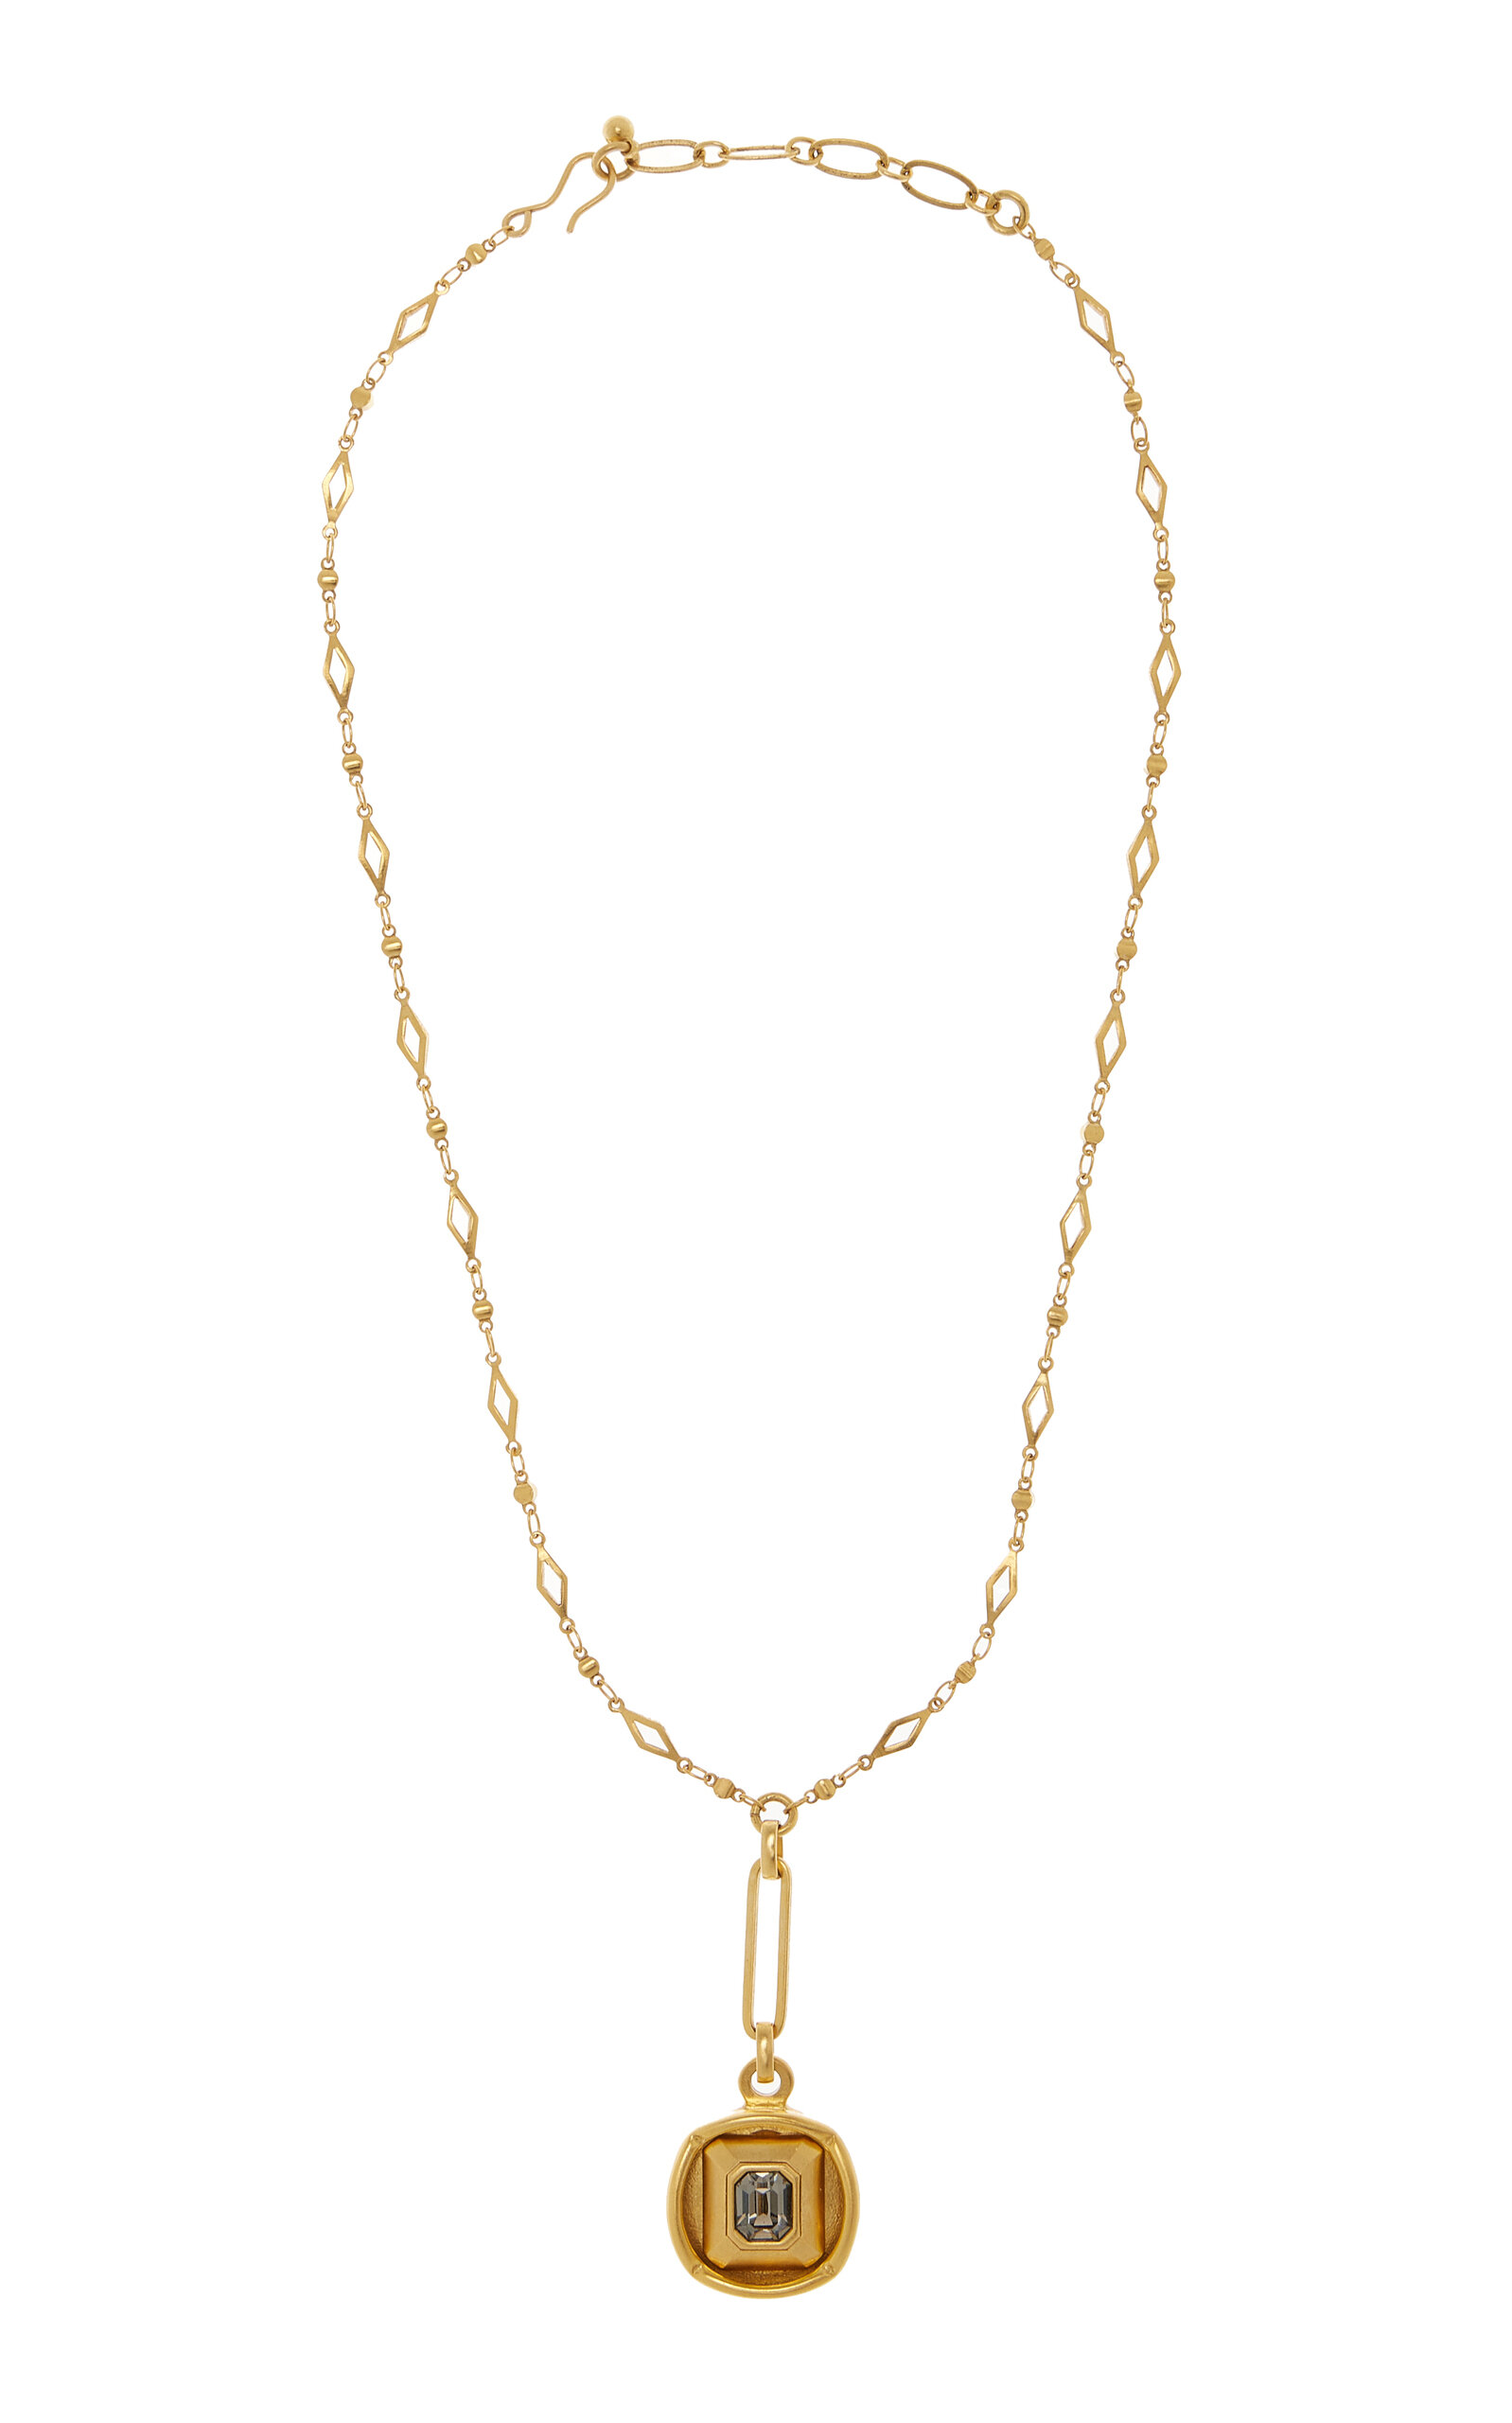 Brinker & Eliza Women's Up The Ante 24K Gold-Plated Crystal Necklace